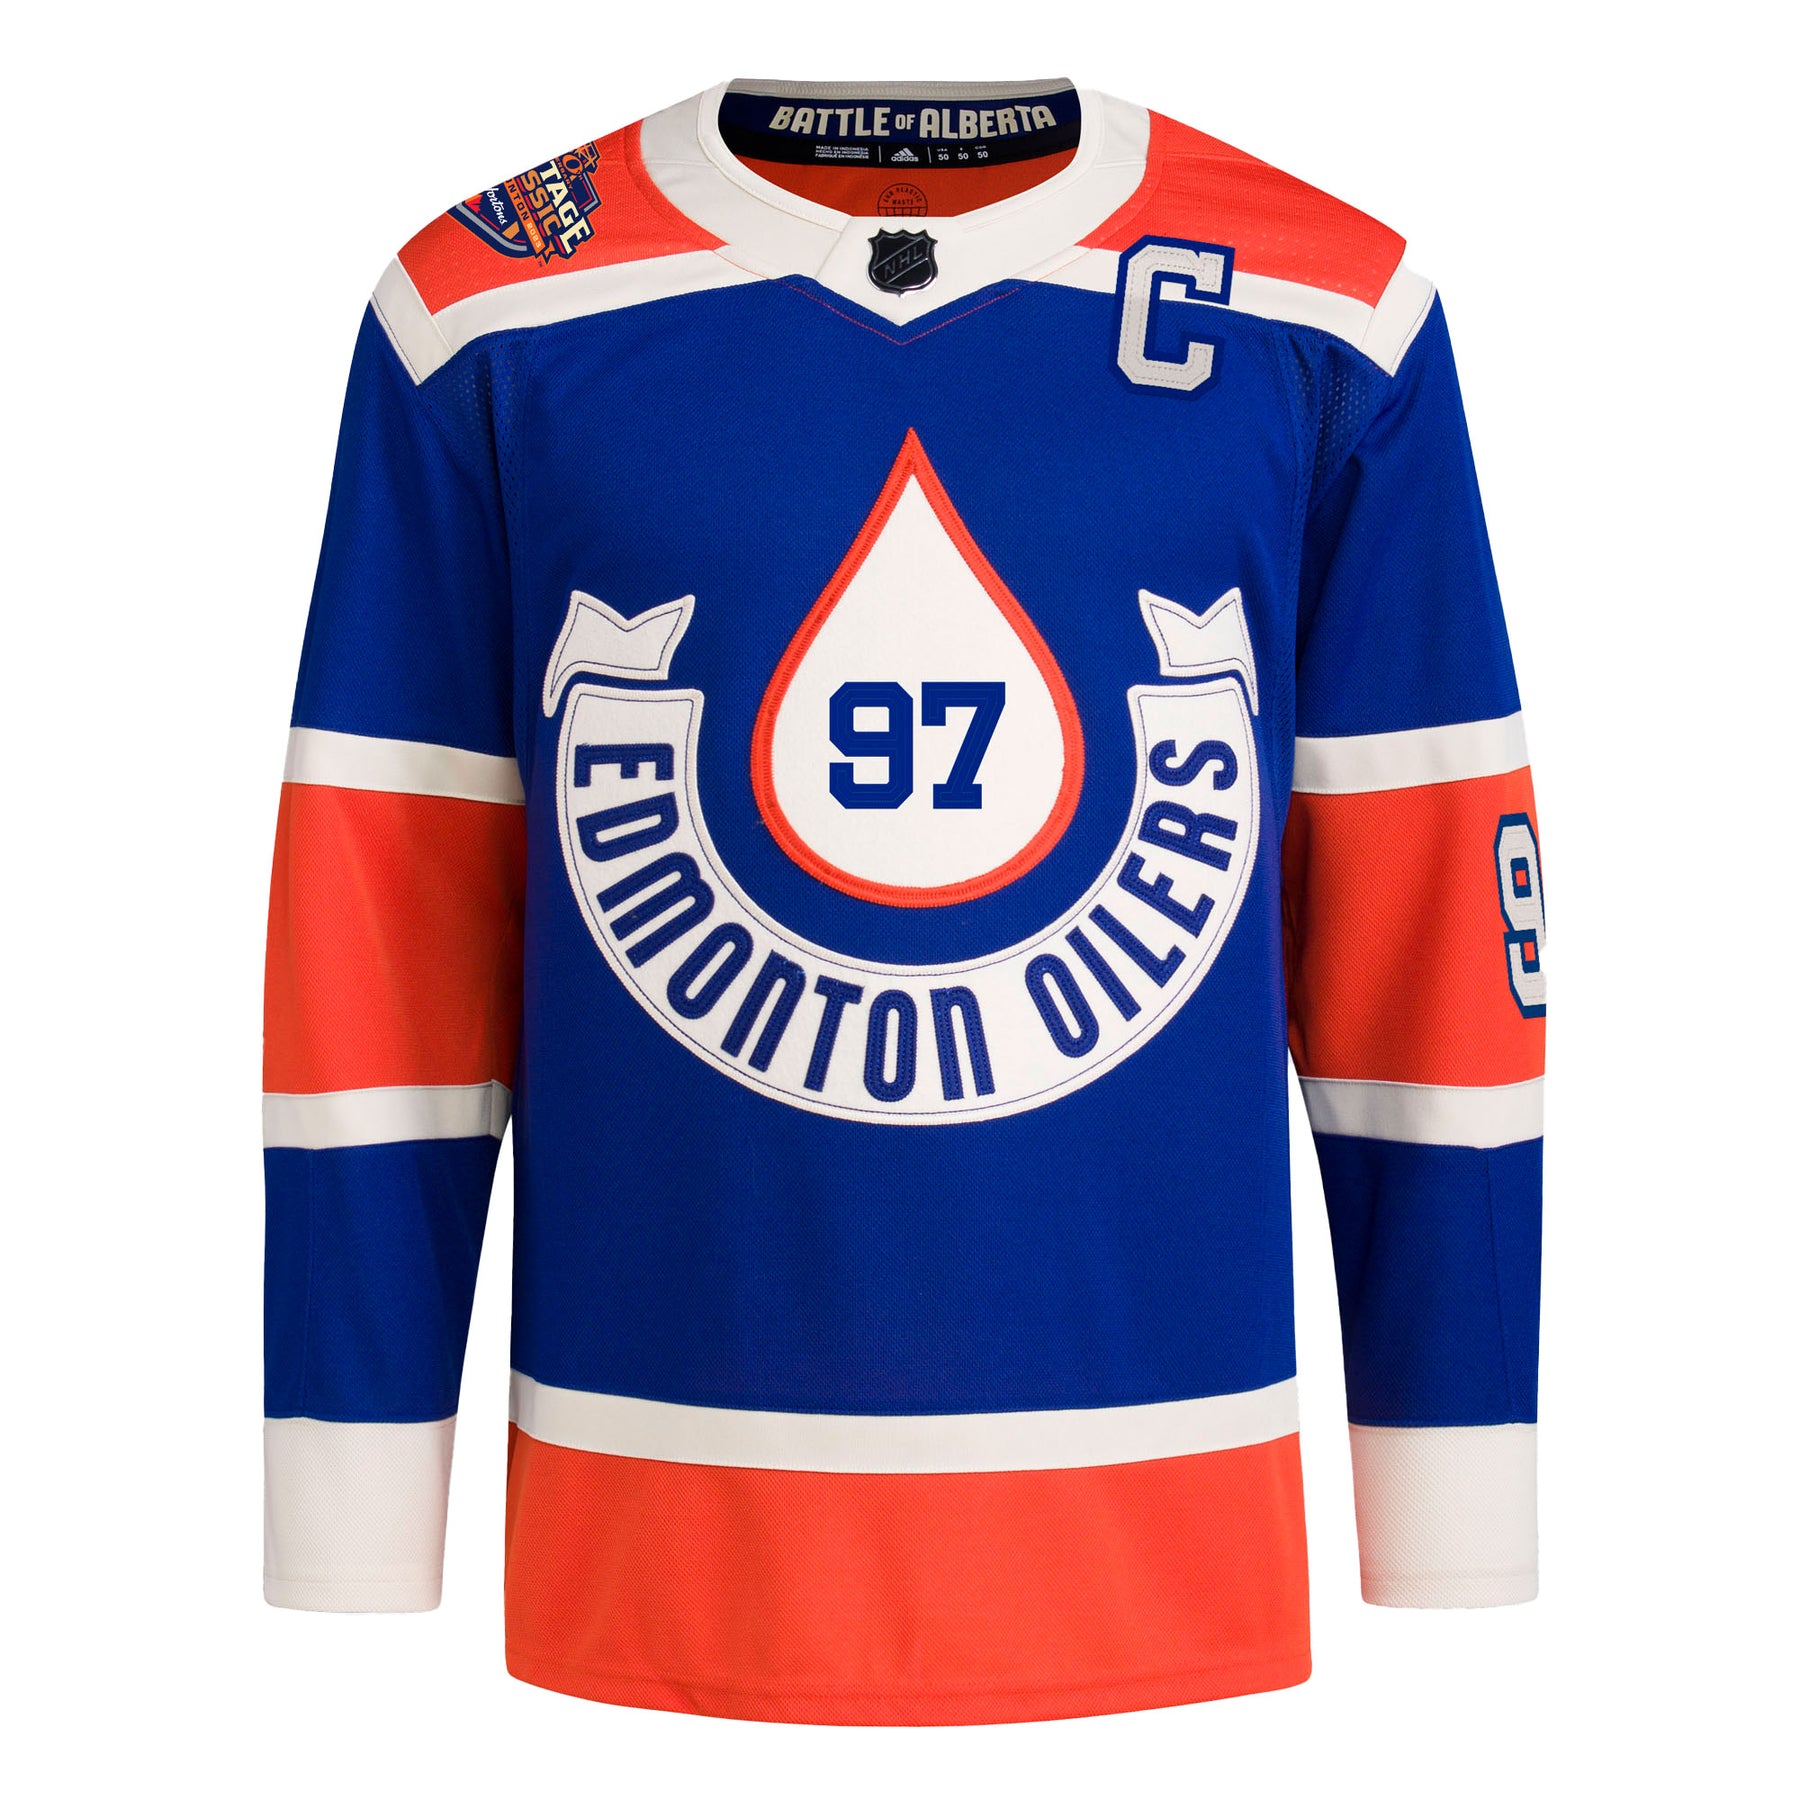 Oilers are bringing back their classic jersey look next season